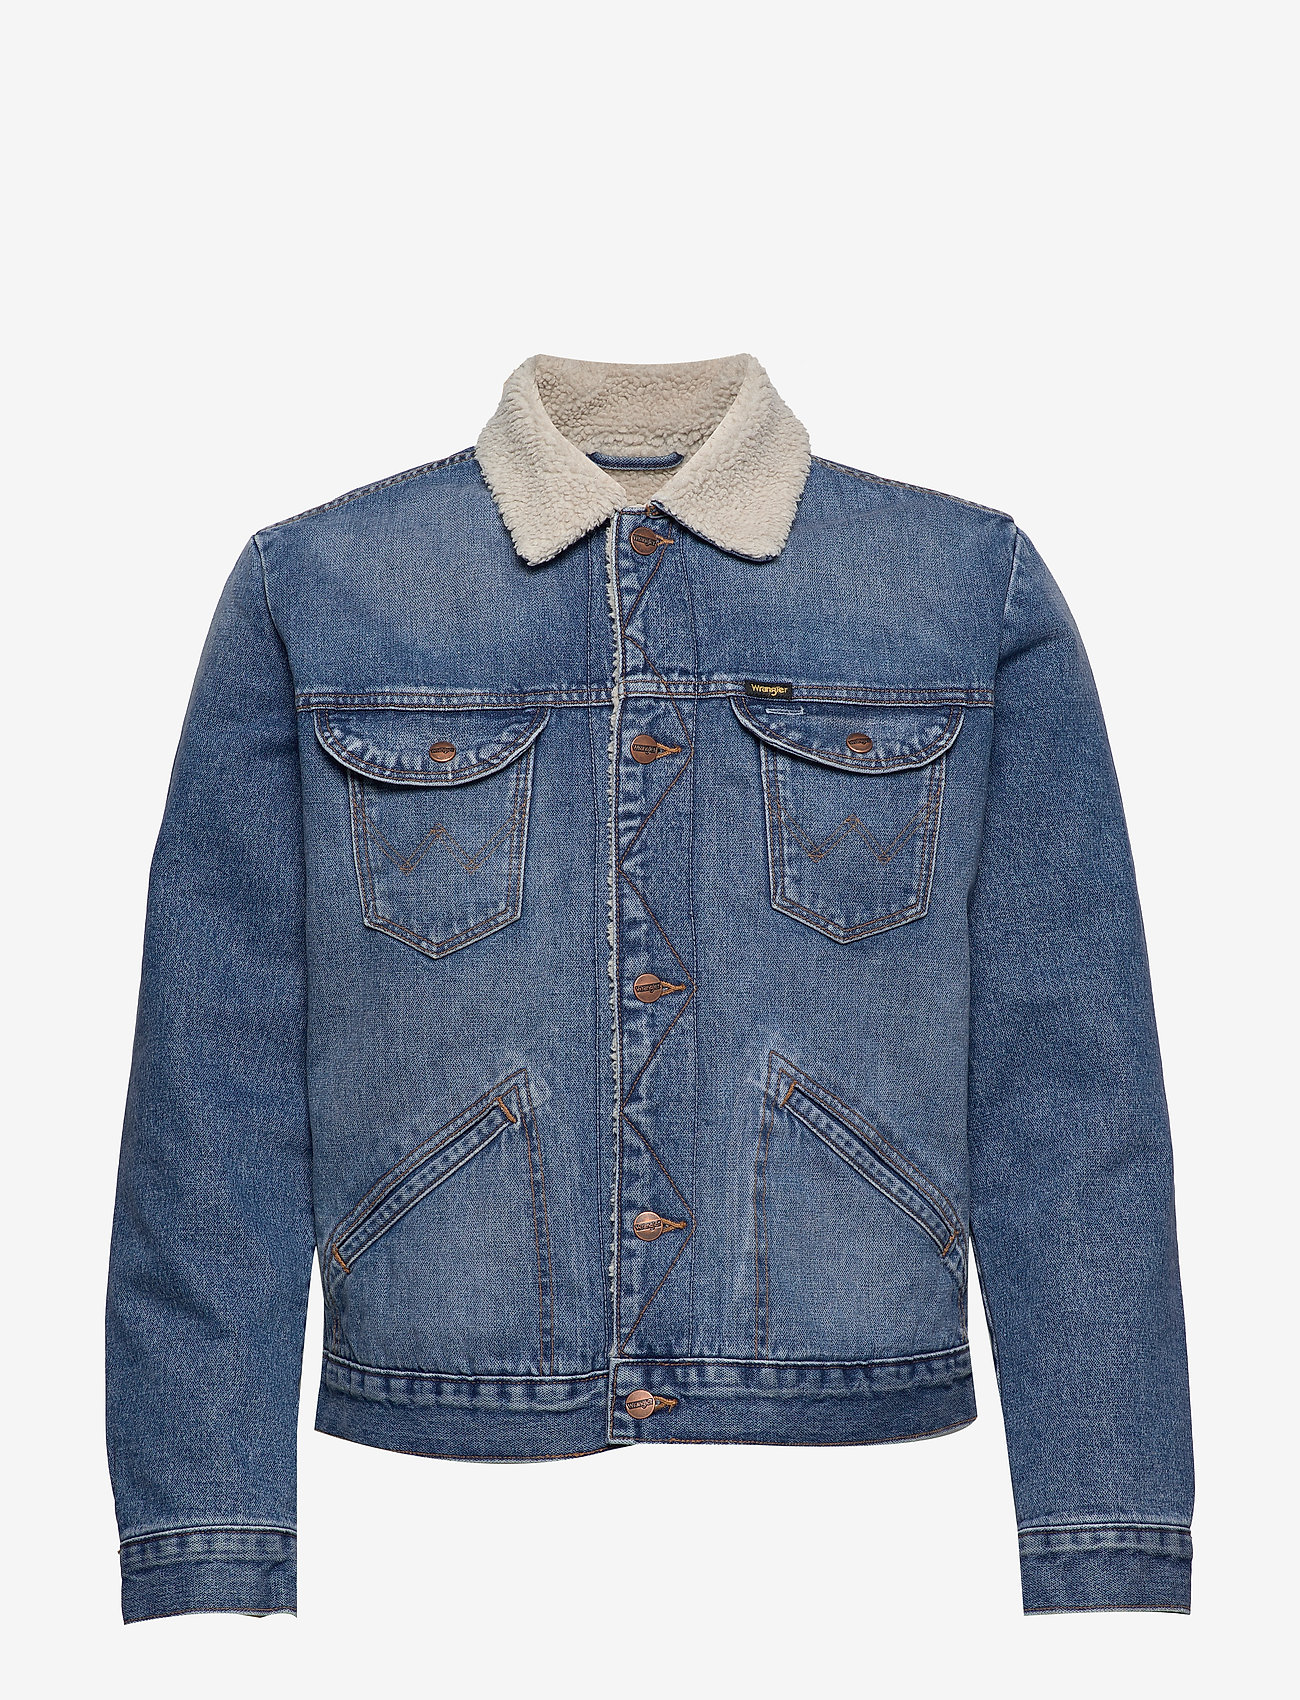 Wrangler 124wj Sherpa  €. Buy Denim Jackets from Wrangler online at  . Fast delivery and easy returns